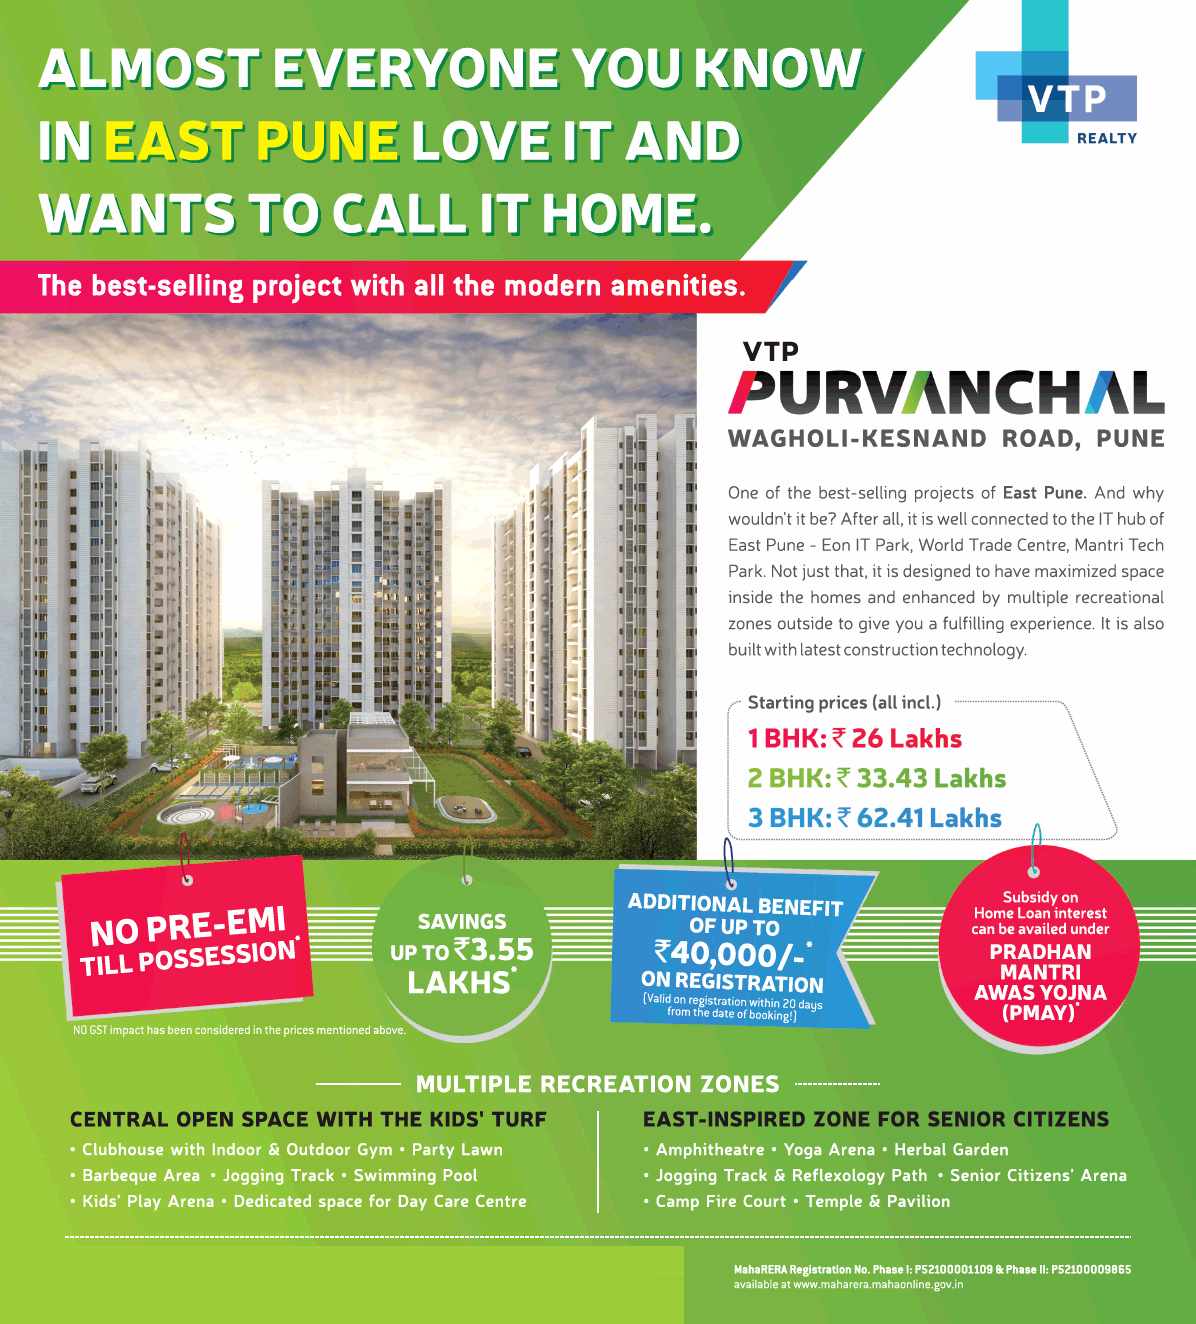 Live in the best selling project with all modern amenities at VTP Purvanchal in Pune